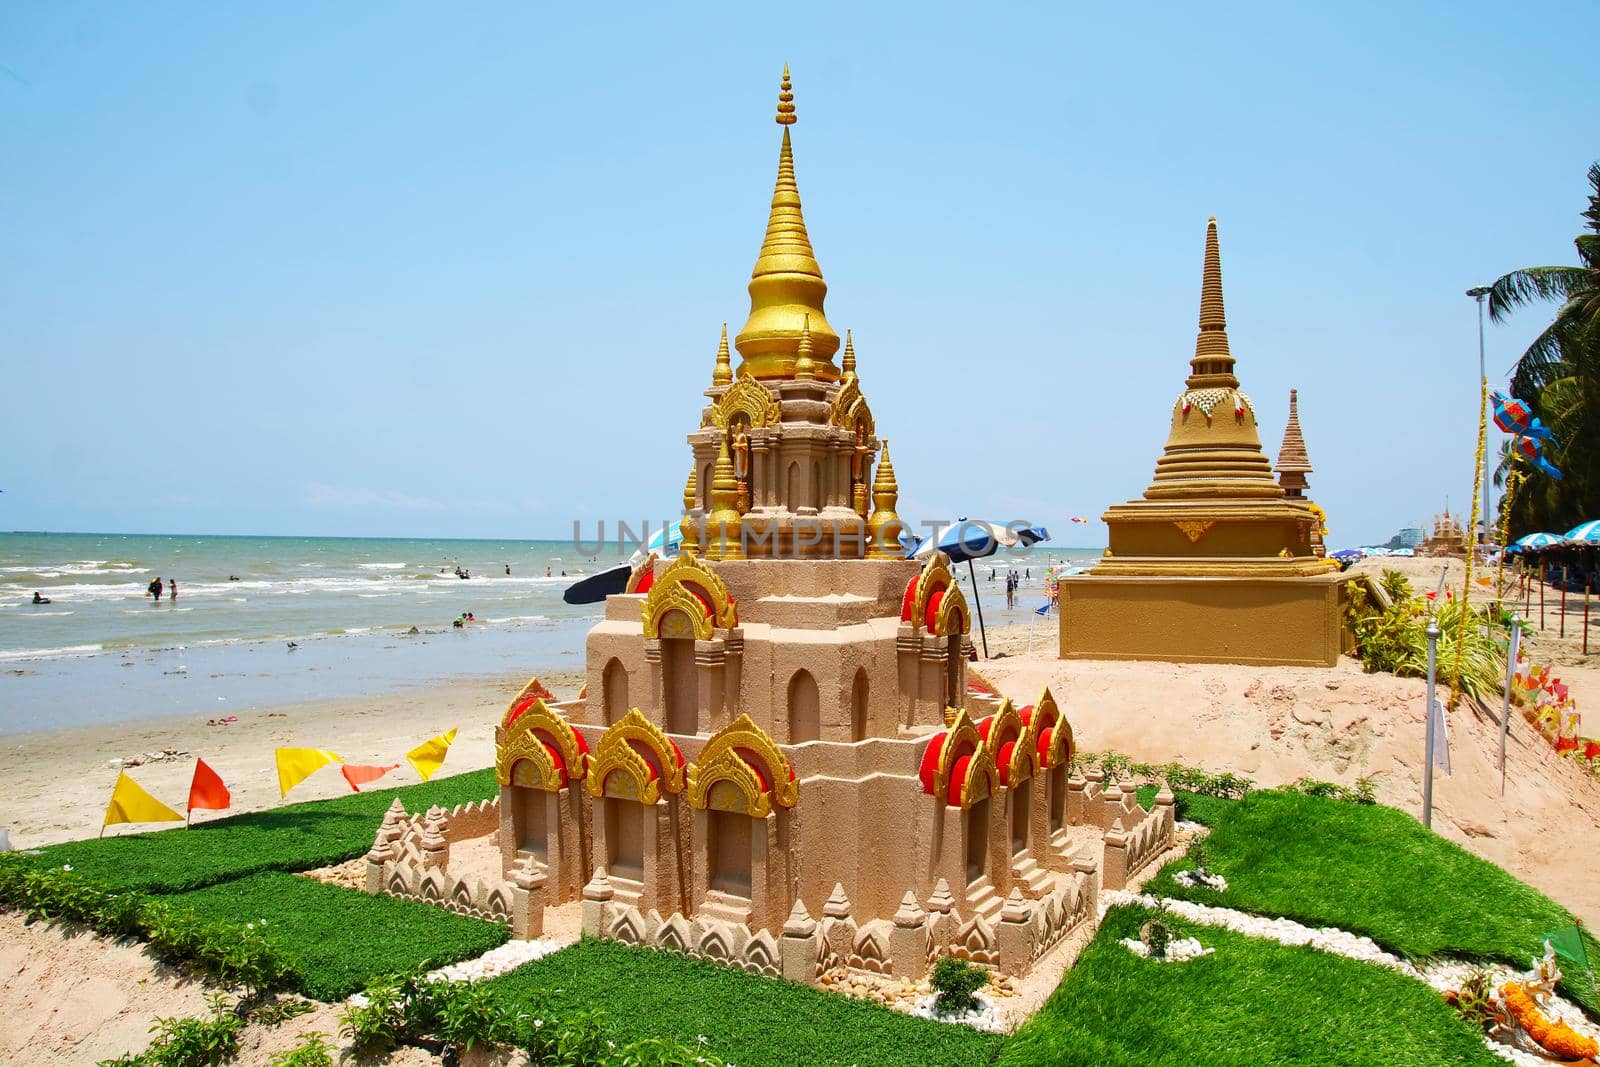 castle sand pagoda in Songkran festival represents In order to take the sand scraps attached to the feet from the temple to return the temple in the shape of a sand pagoda